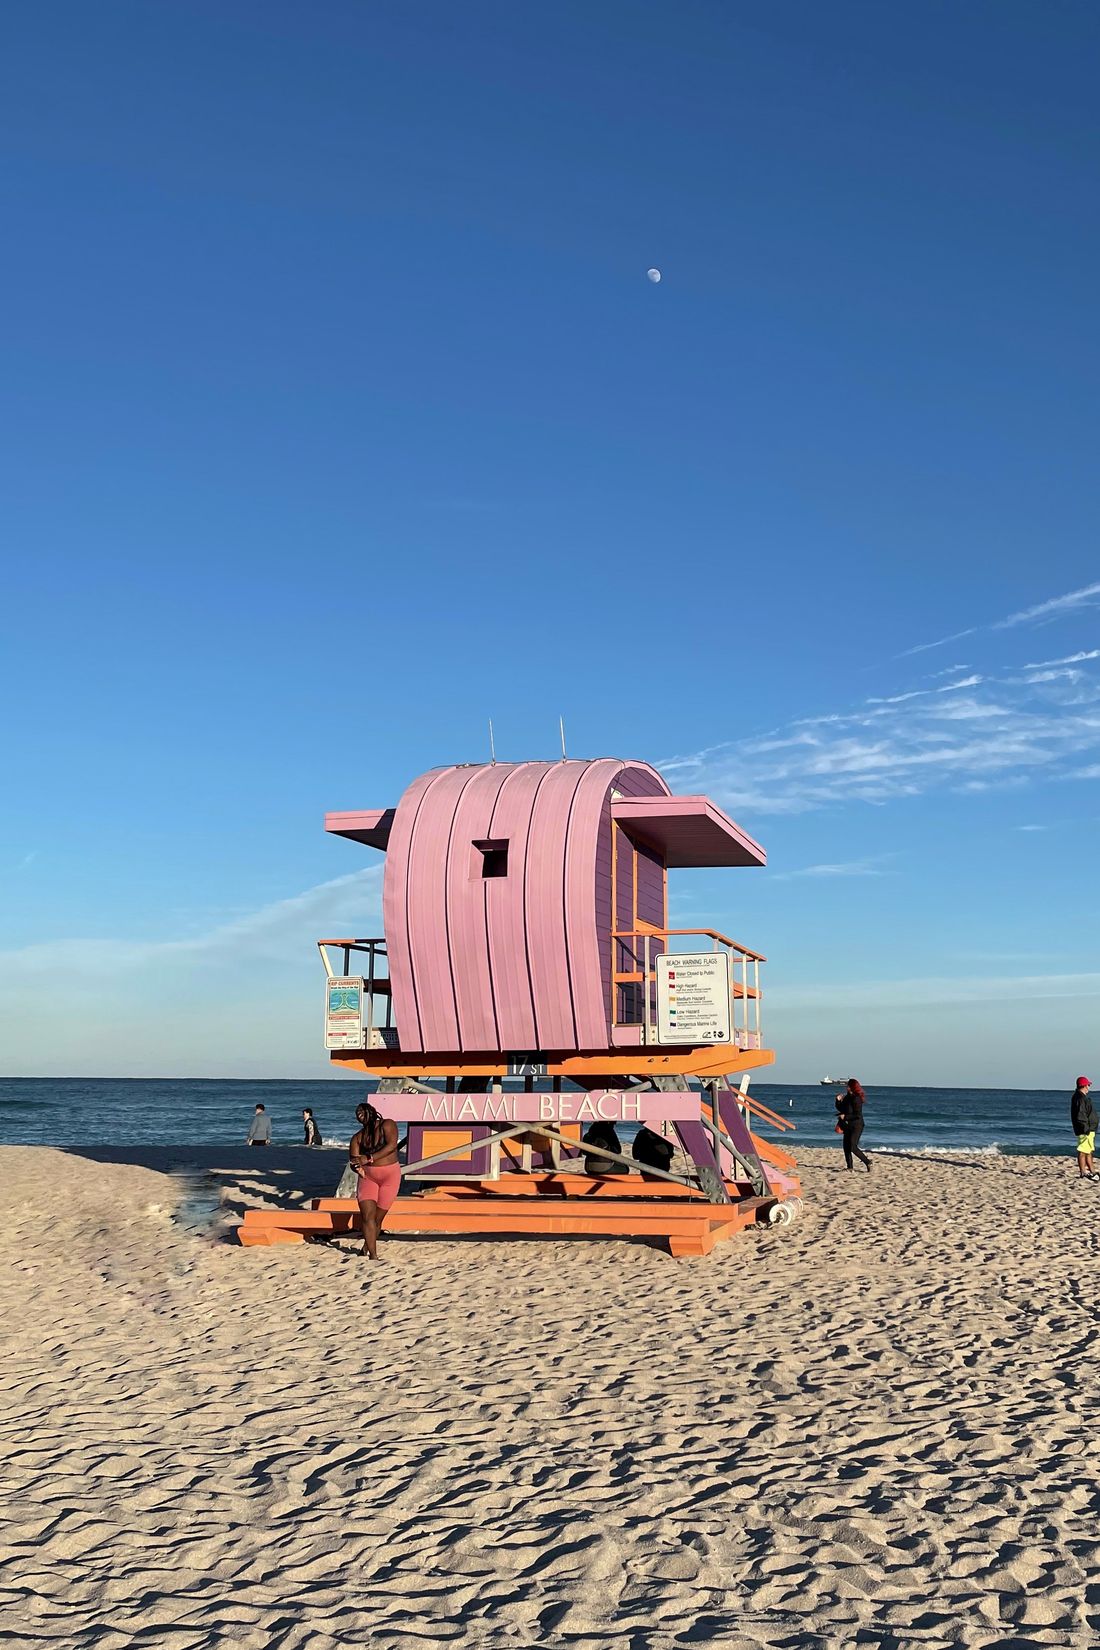 The Best Things To Do In Miami Beach, FL